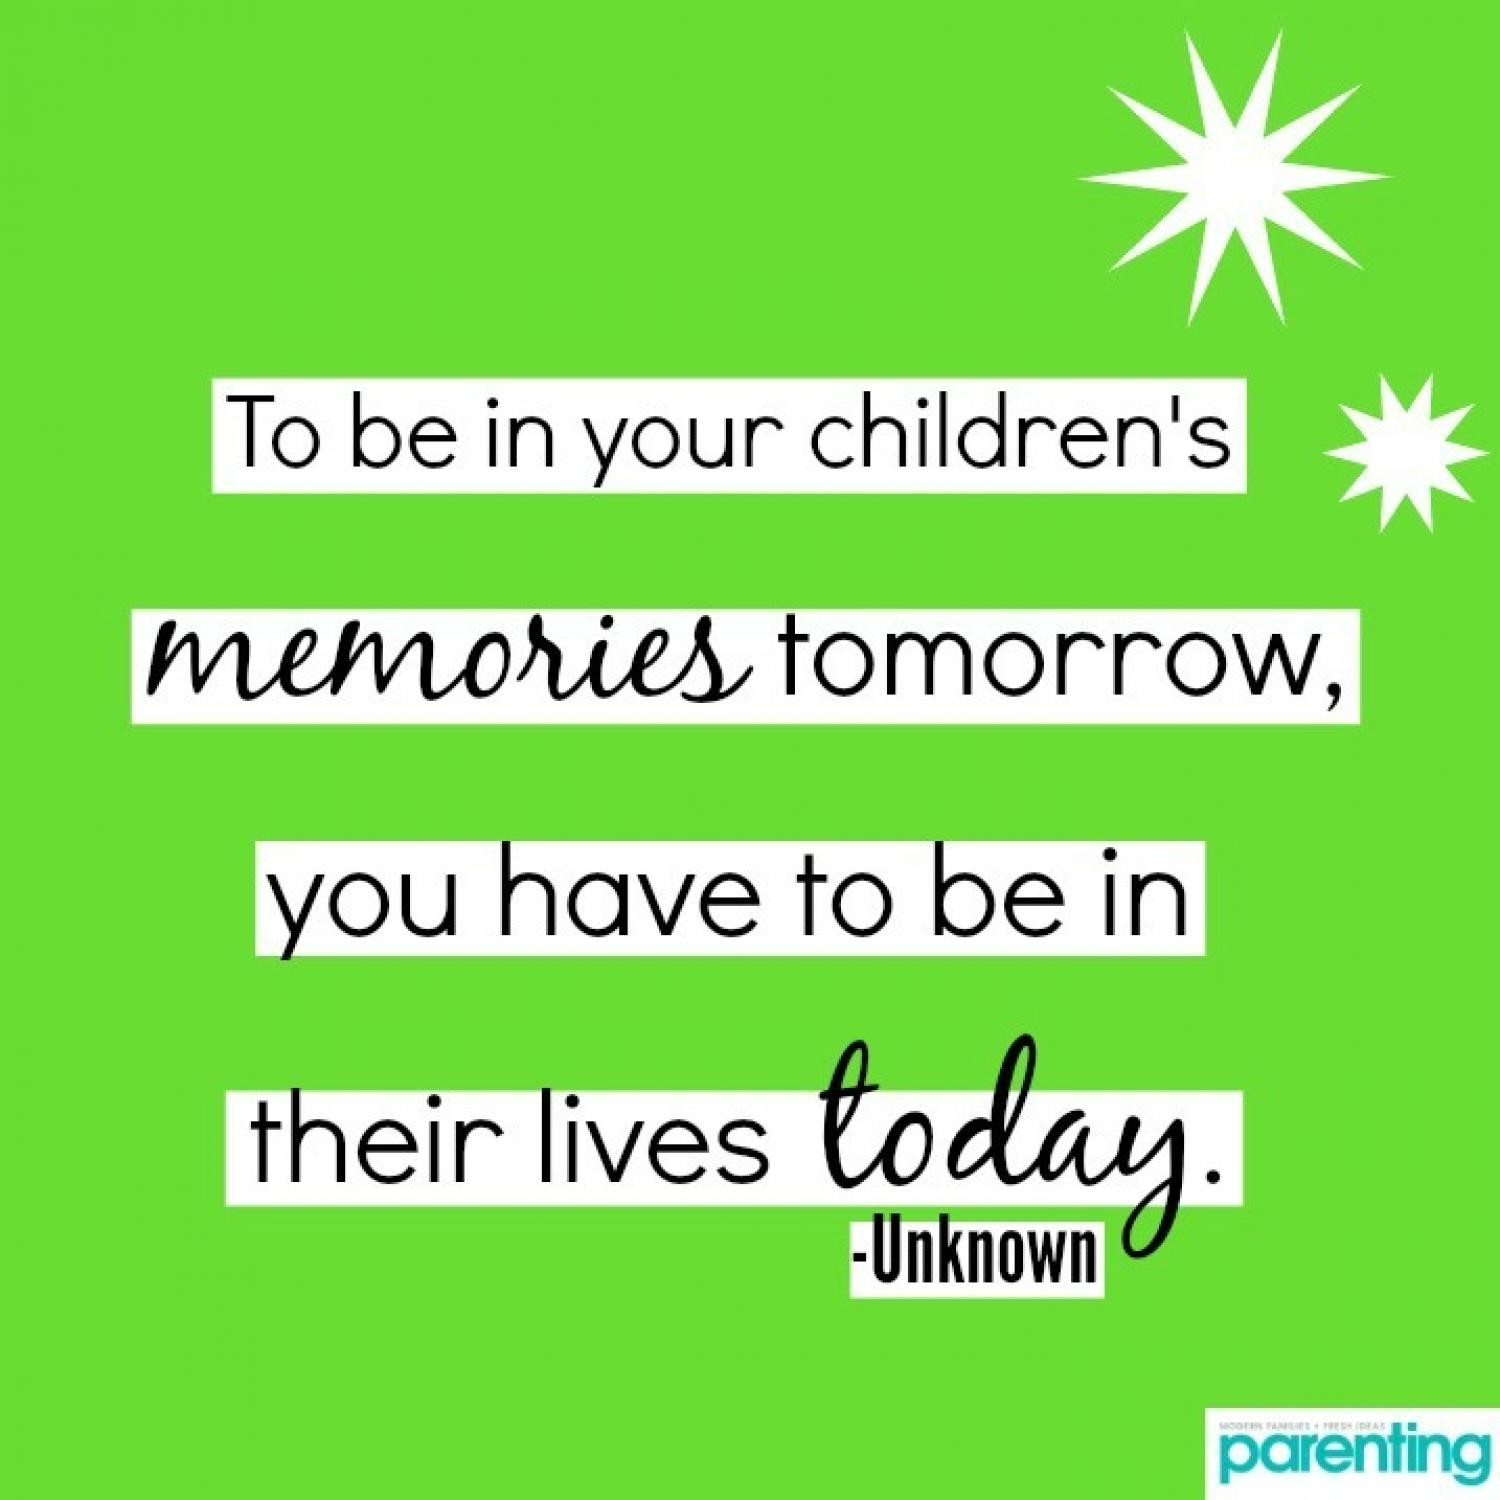 Educational Quotes For Parents
 17 Amazing Parenting Quotes That Will Make You a Better